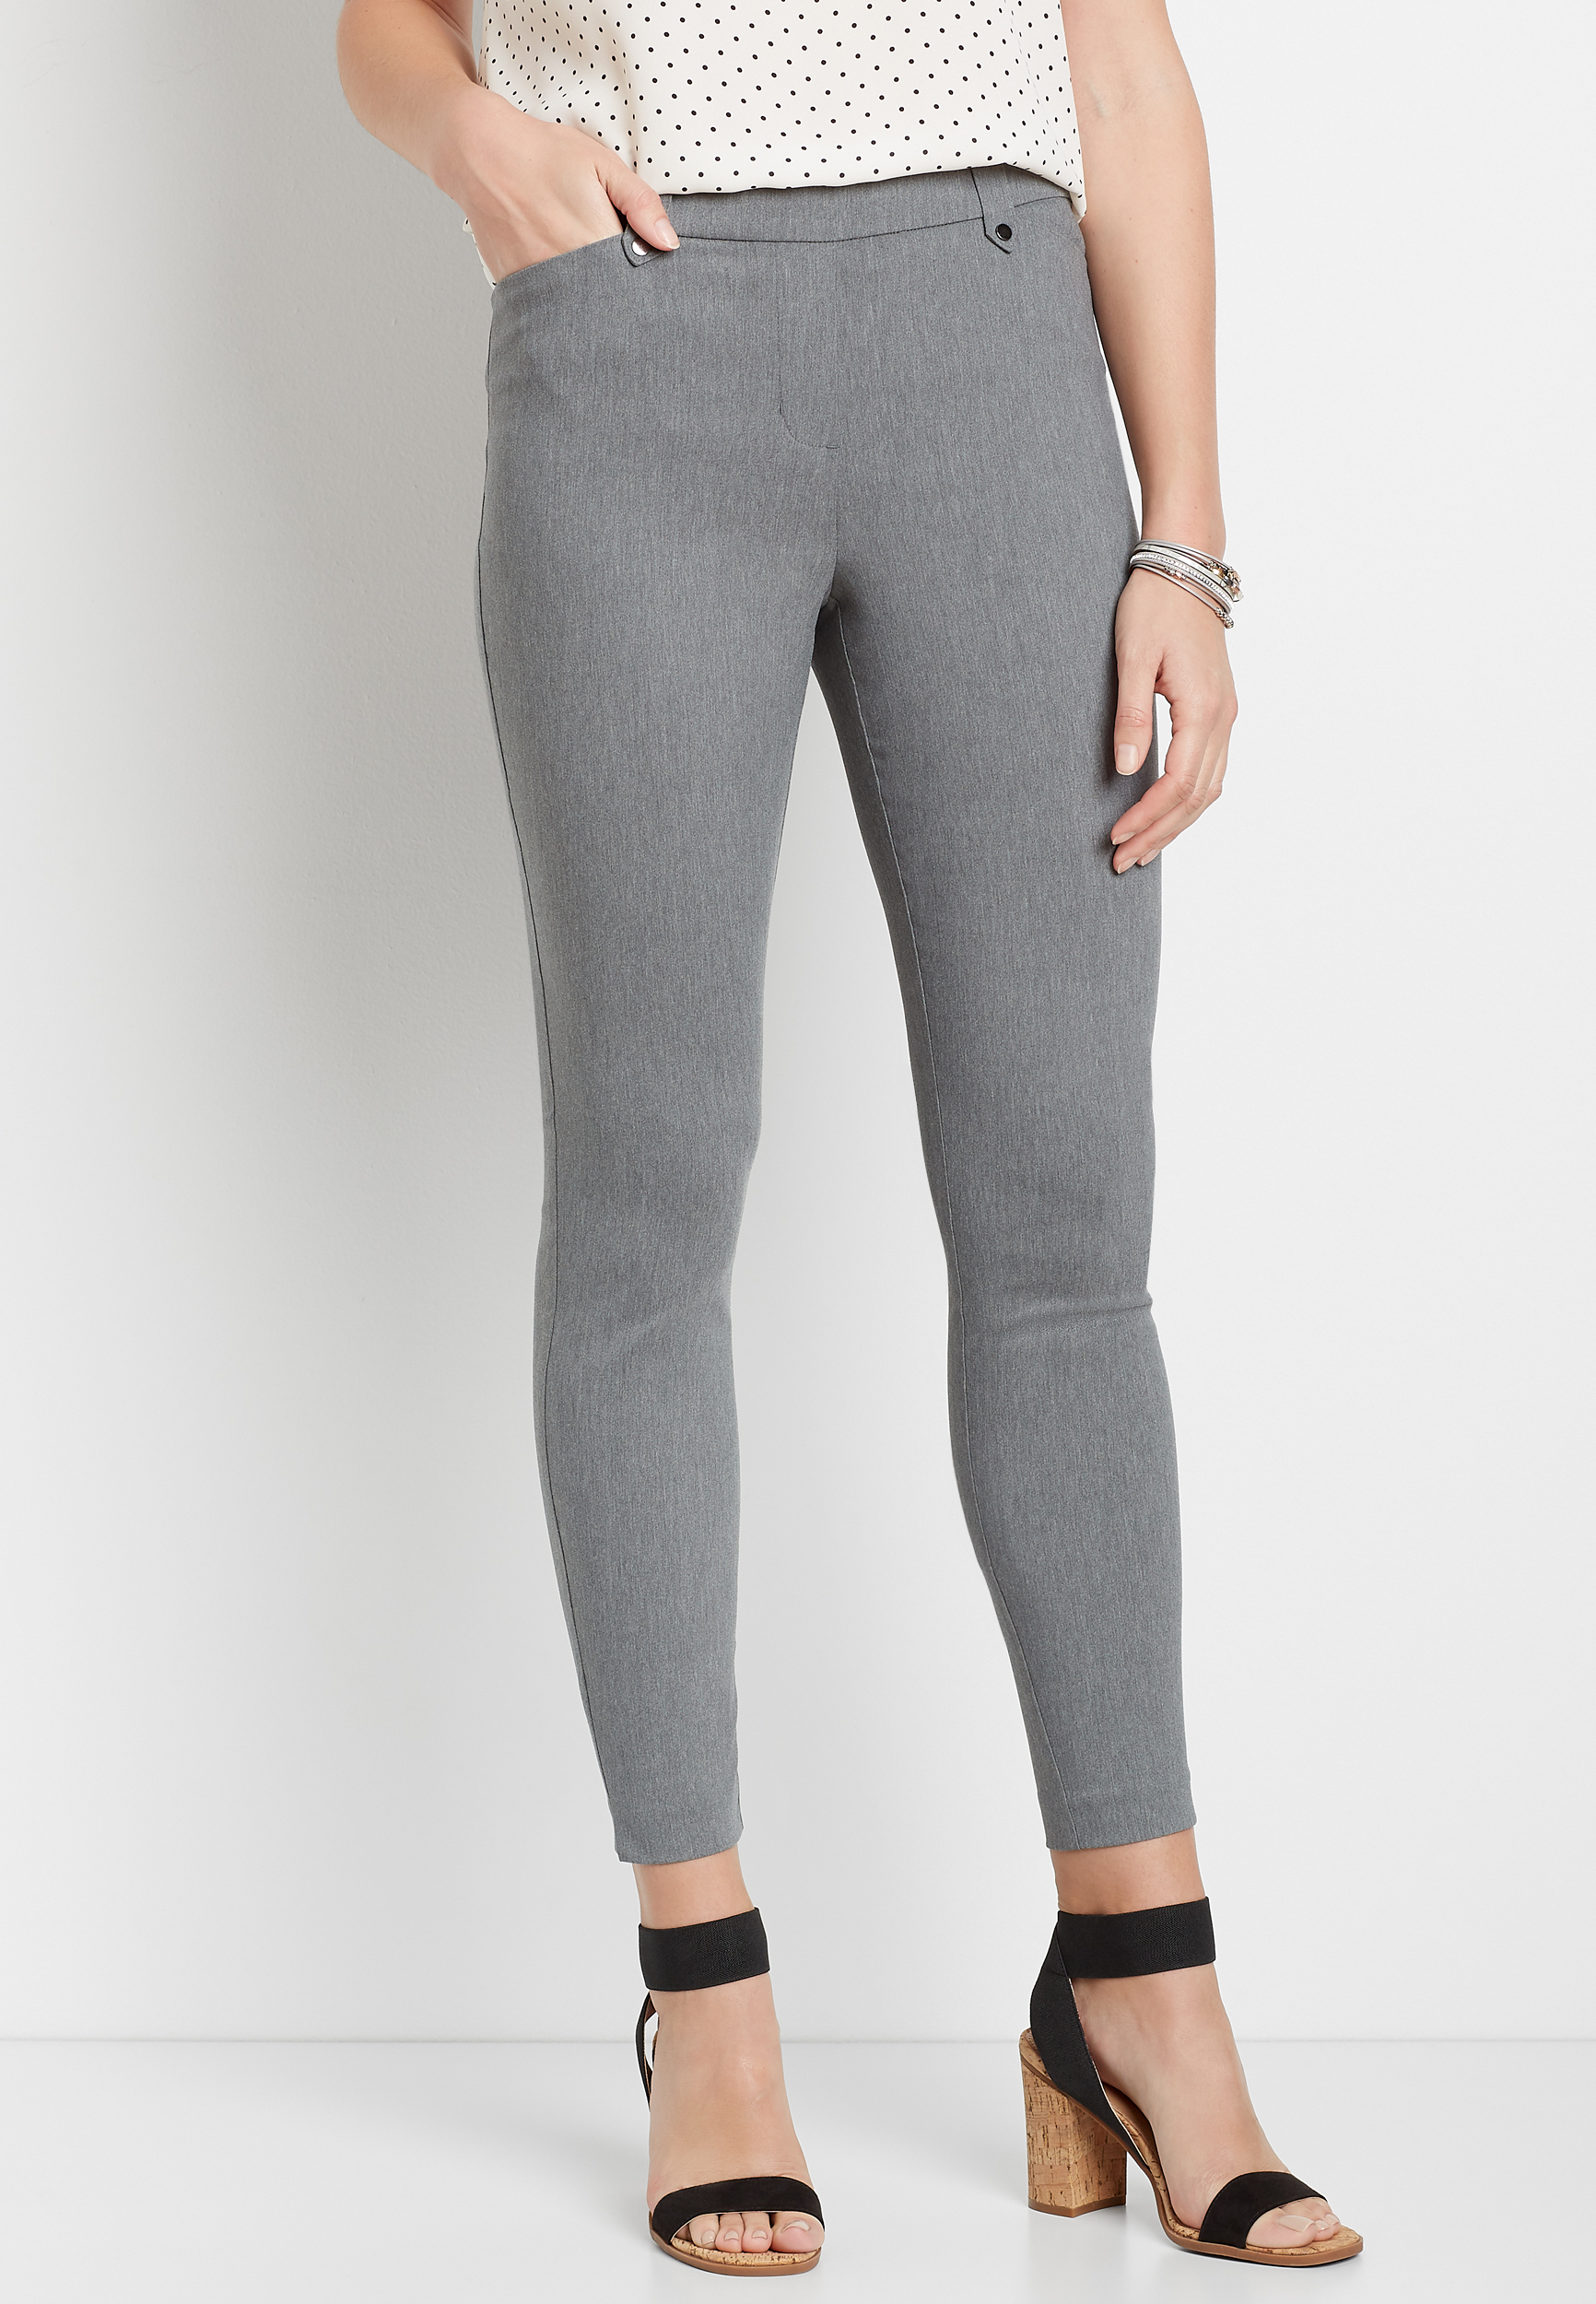 Gray Bengaline Skinny Ankle Pant | maurices